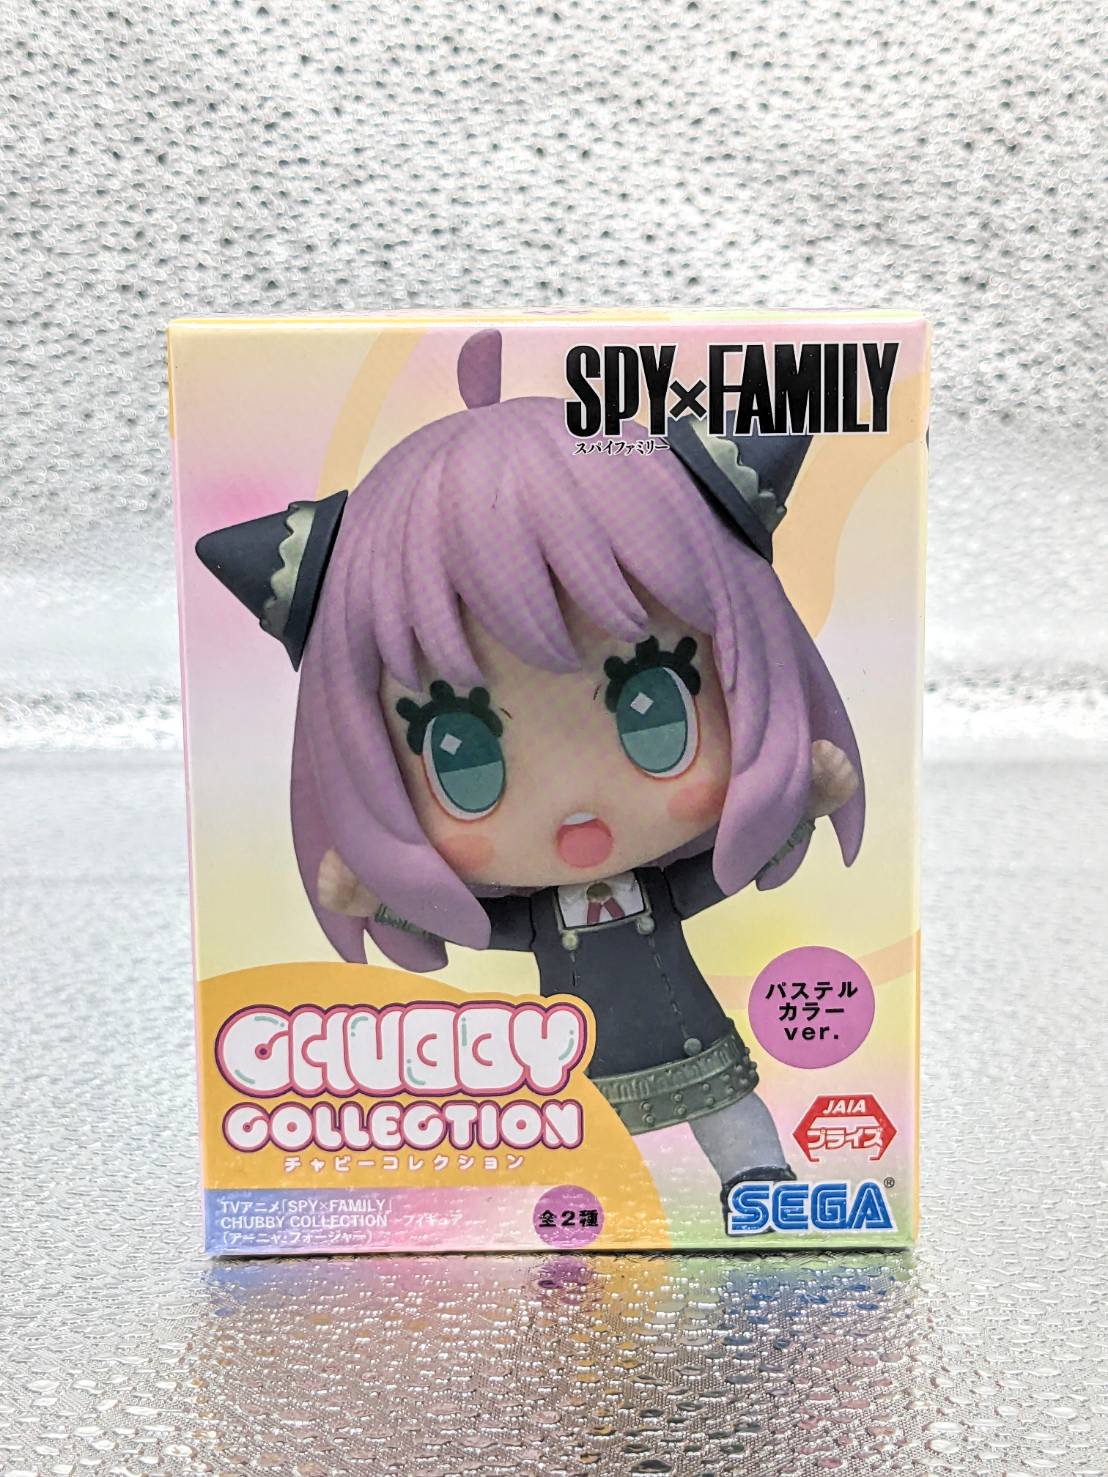 JUNGLE Special Collectors Shop / TVアニメ「SPY×FAMILY」 CHUBBY COLLECTION ( チャビーコレクション)フィギュア (アーニャ・フォージャー) パステルカラー 1068080